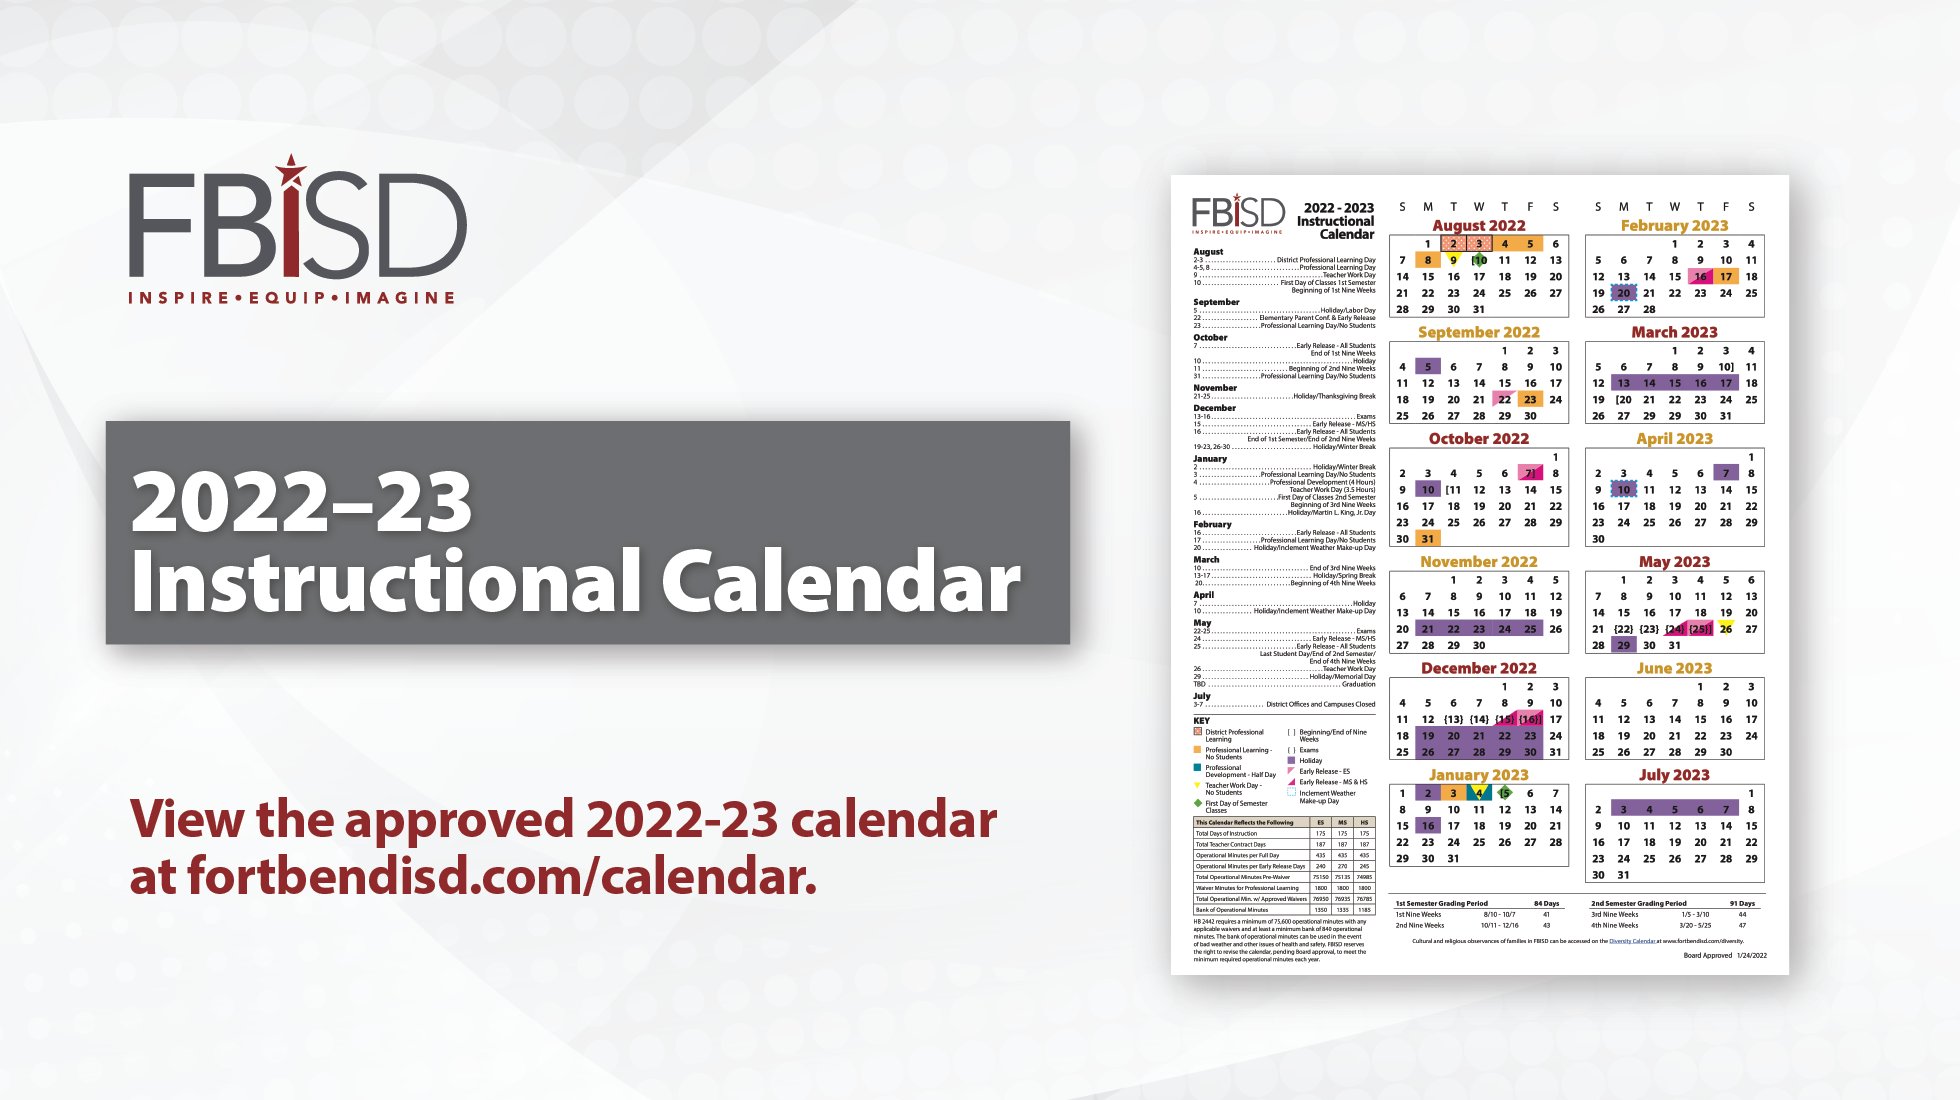 Fort Bend Calendar 2022 Fort Bend Isd On Twitter: "The 2022-23 Instructional Calendar Has Been  Approved By The Fort Bend Isd Board Of Trustees. 📅 View The Approved 2022-23  Calendar At Https://T.co/Sussnjxanh. Https://T.co/Y4Gaewjwxc" / Twitter